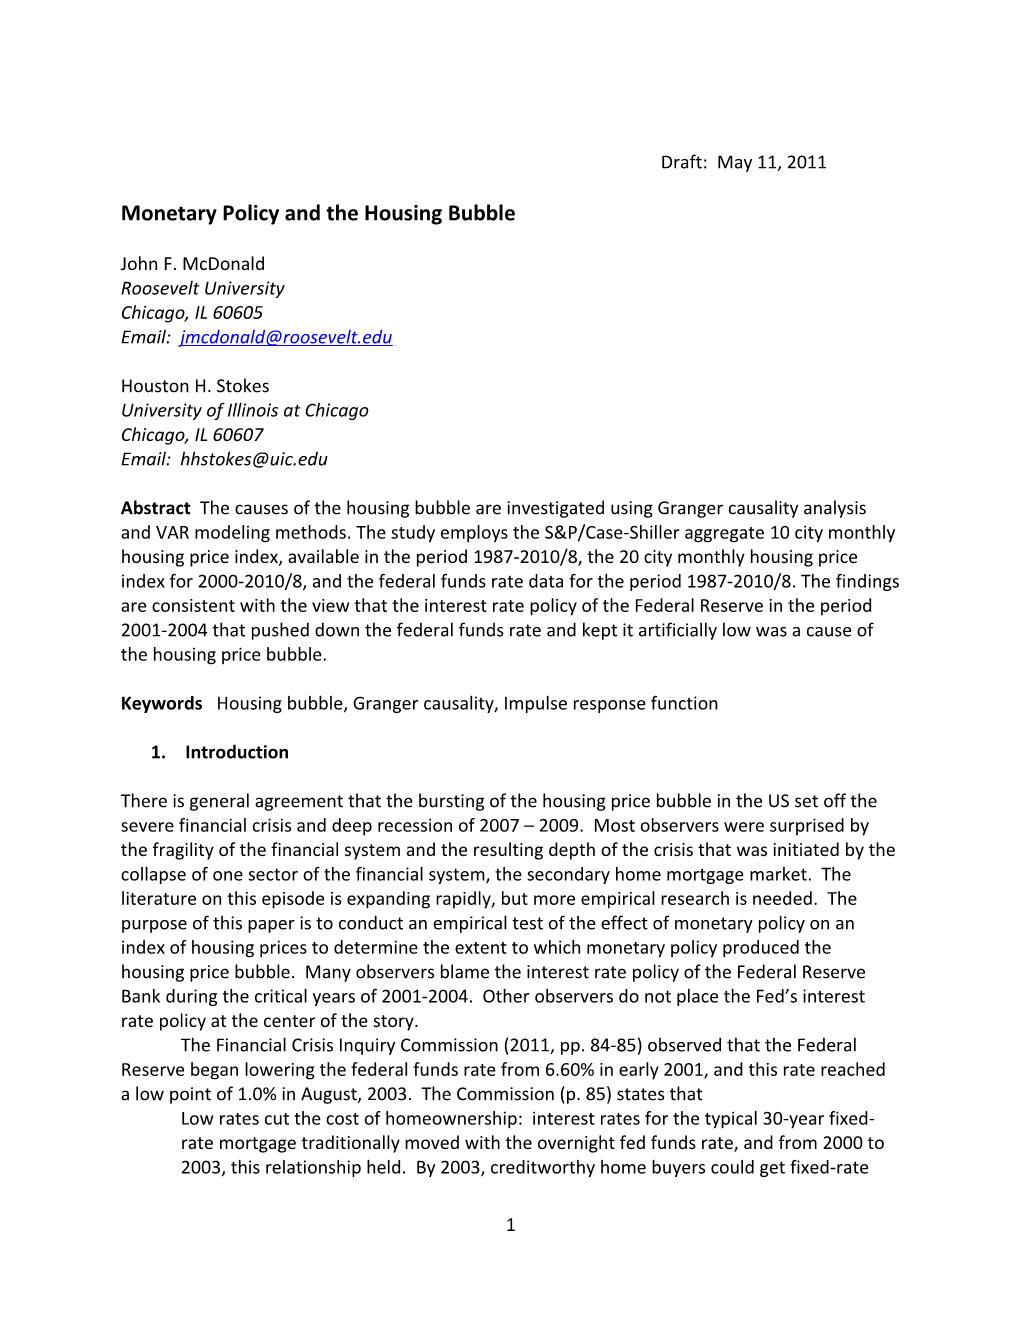 Monetary Policy and the Housing Bubble